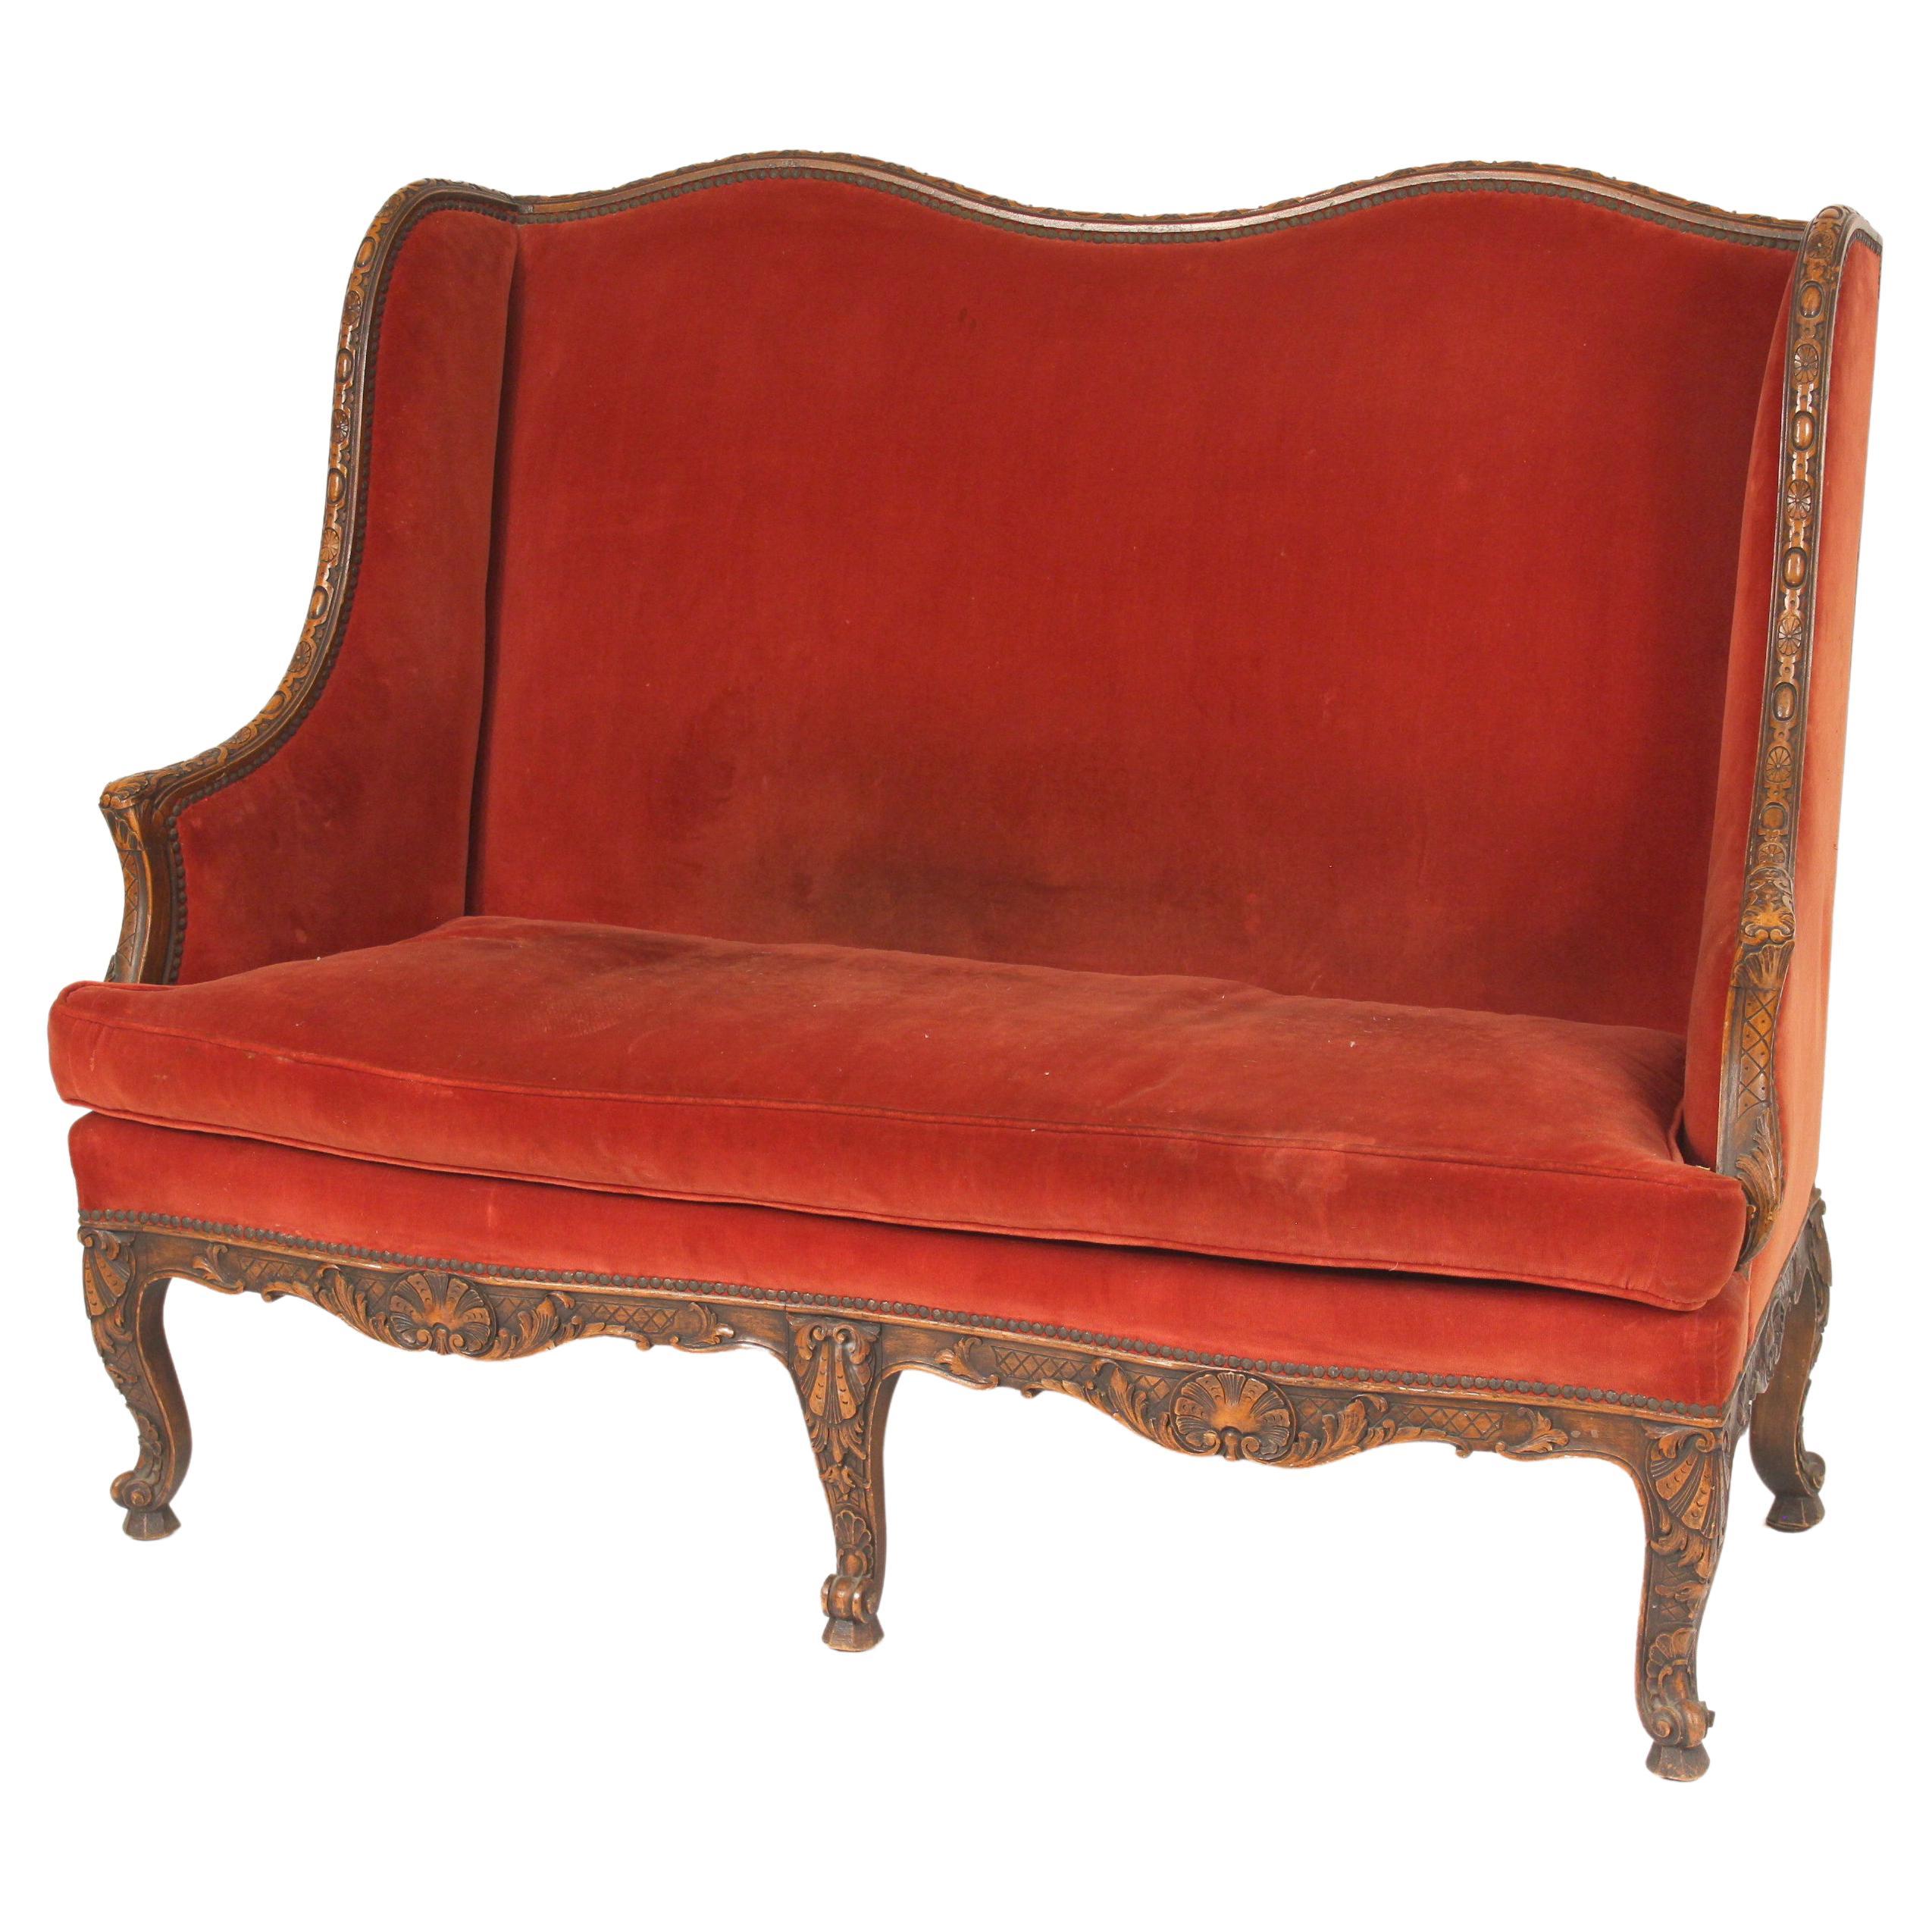 Antique French Regence Style Settee